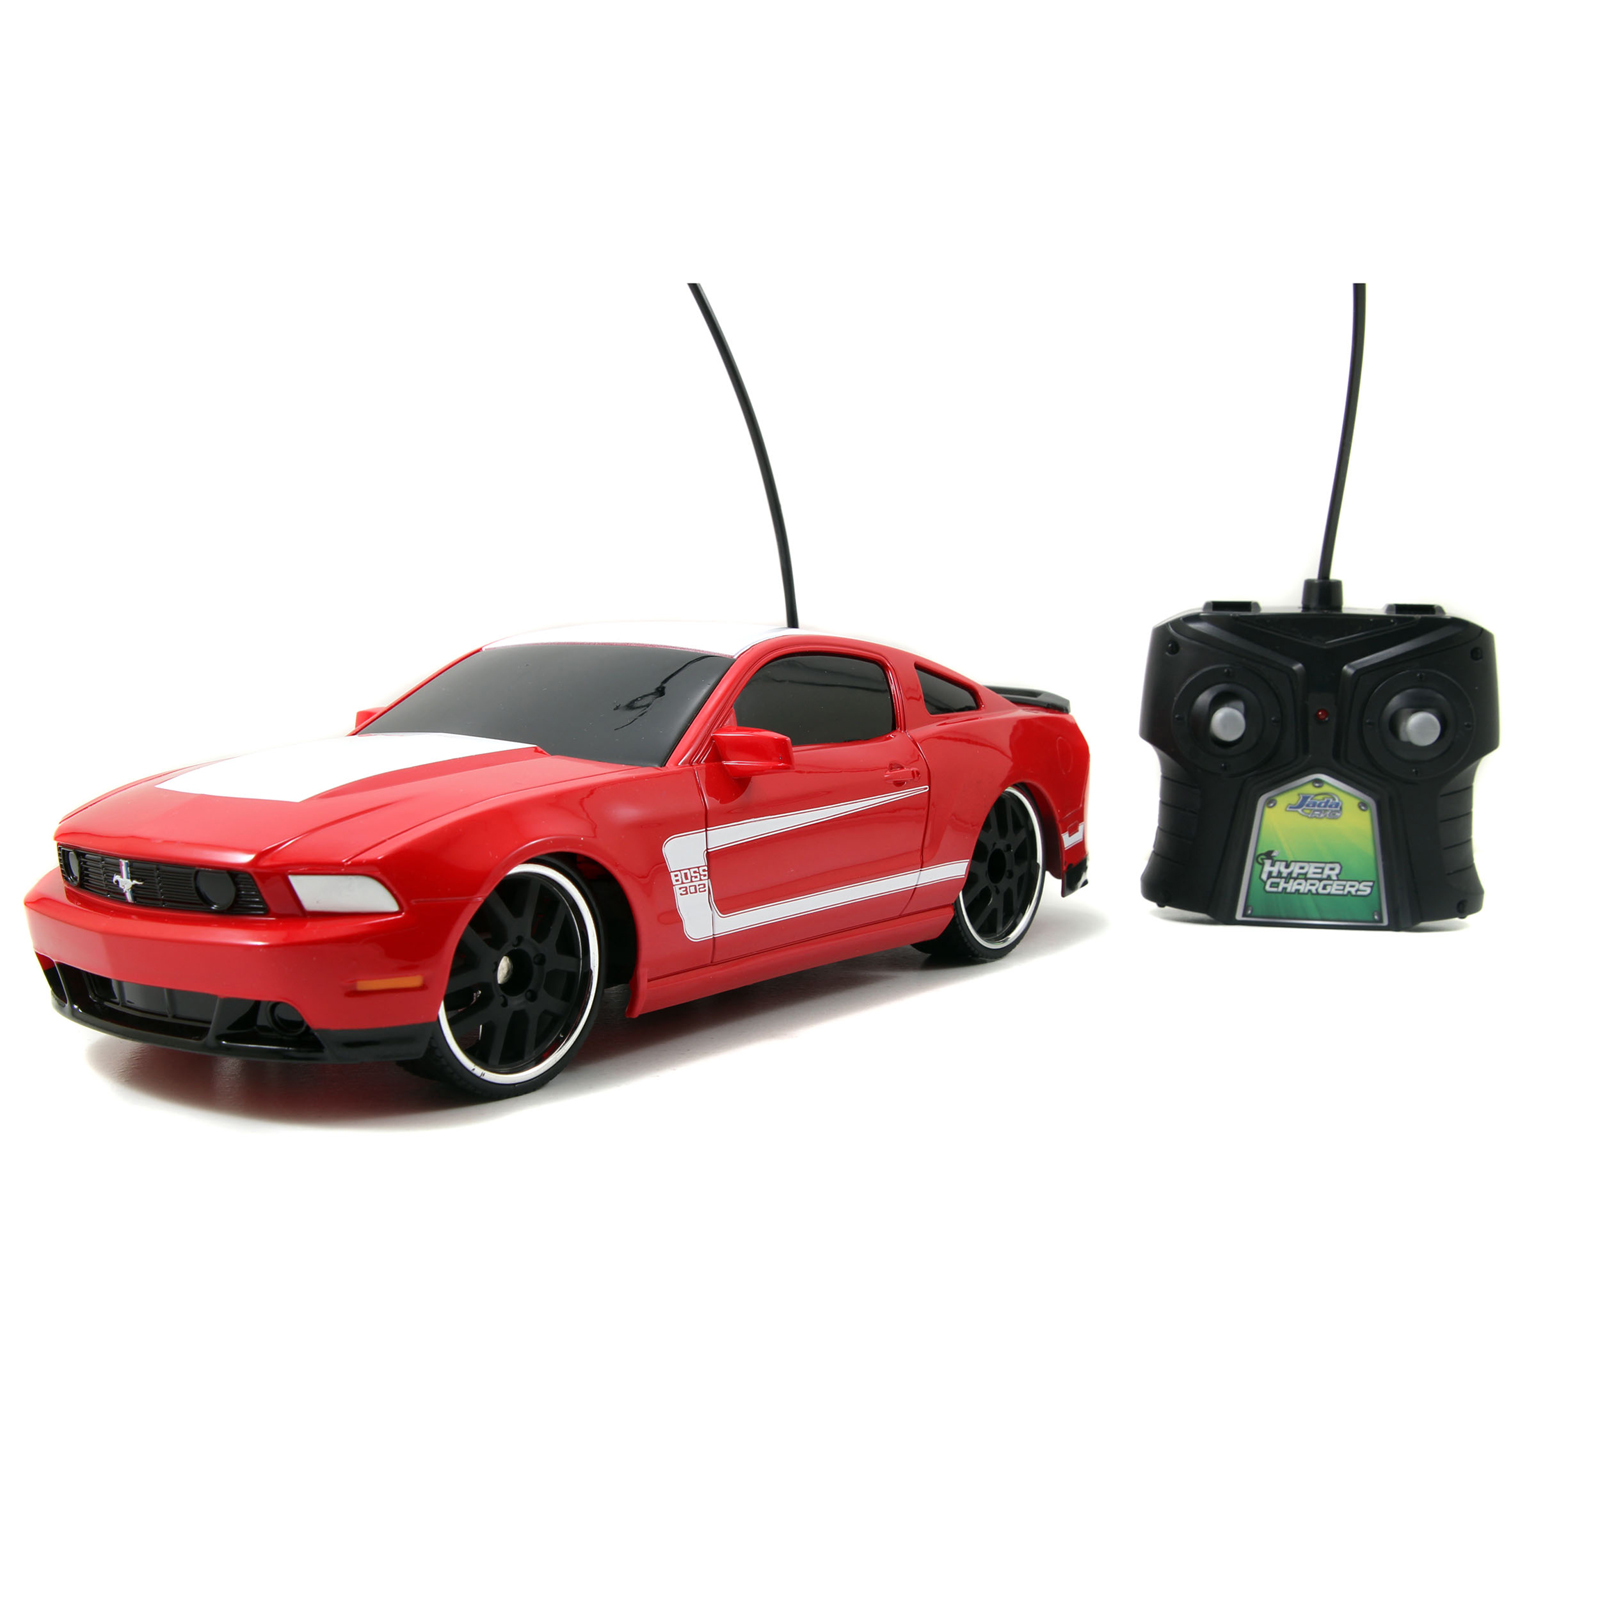 HyperChargers 1:16 BTM 2012 Ford Mustang Boss Remote Control Car